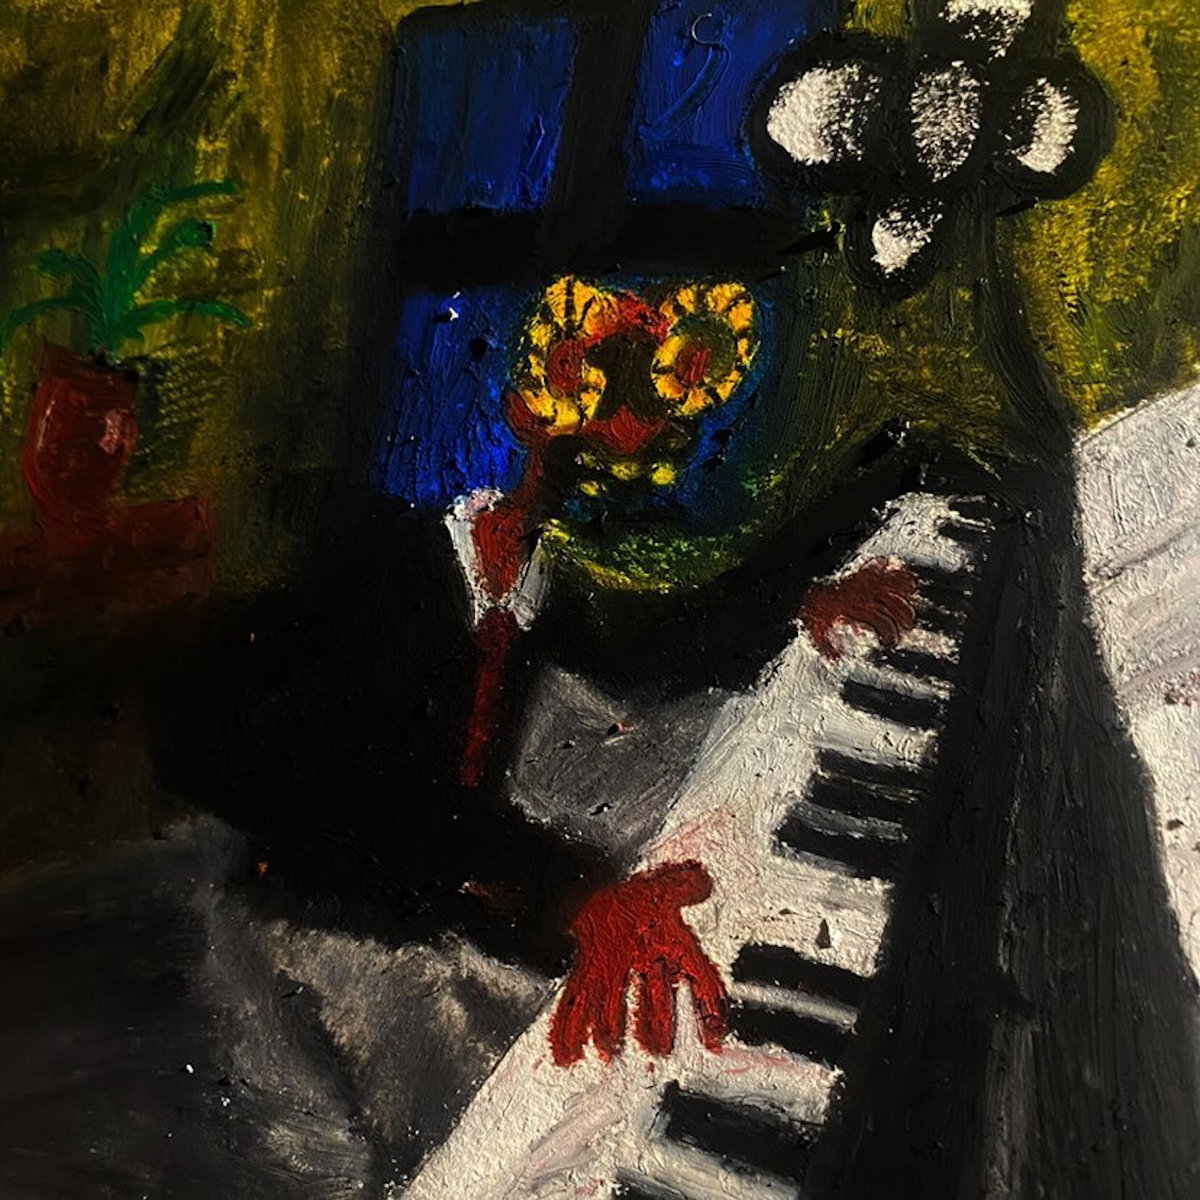 Cover art for The Horn of the Lamb by The Blackhearts. Oil pastels drawing of someone playing the piano.